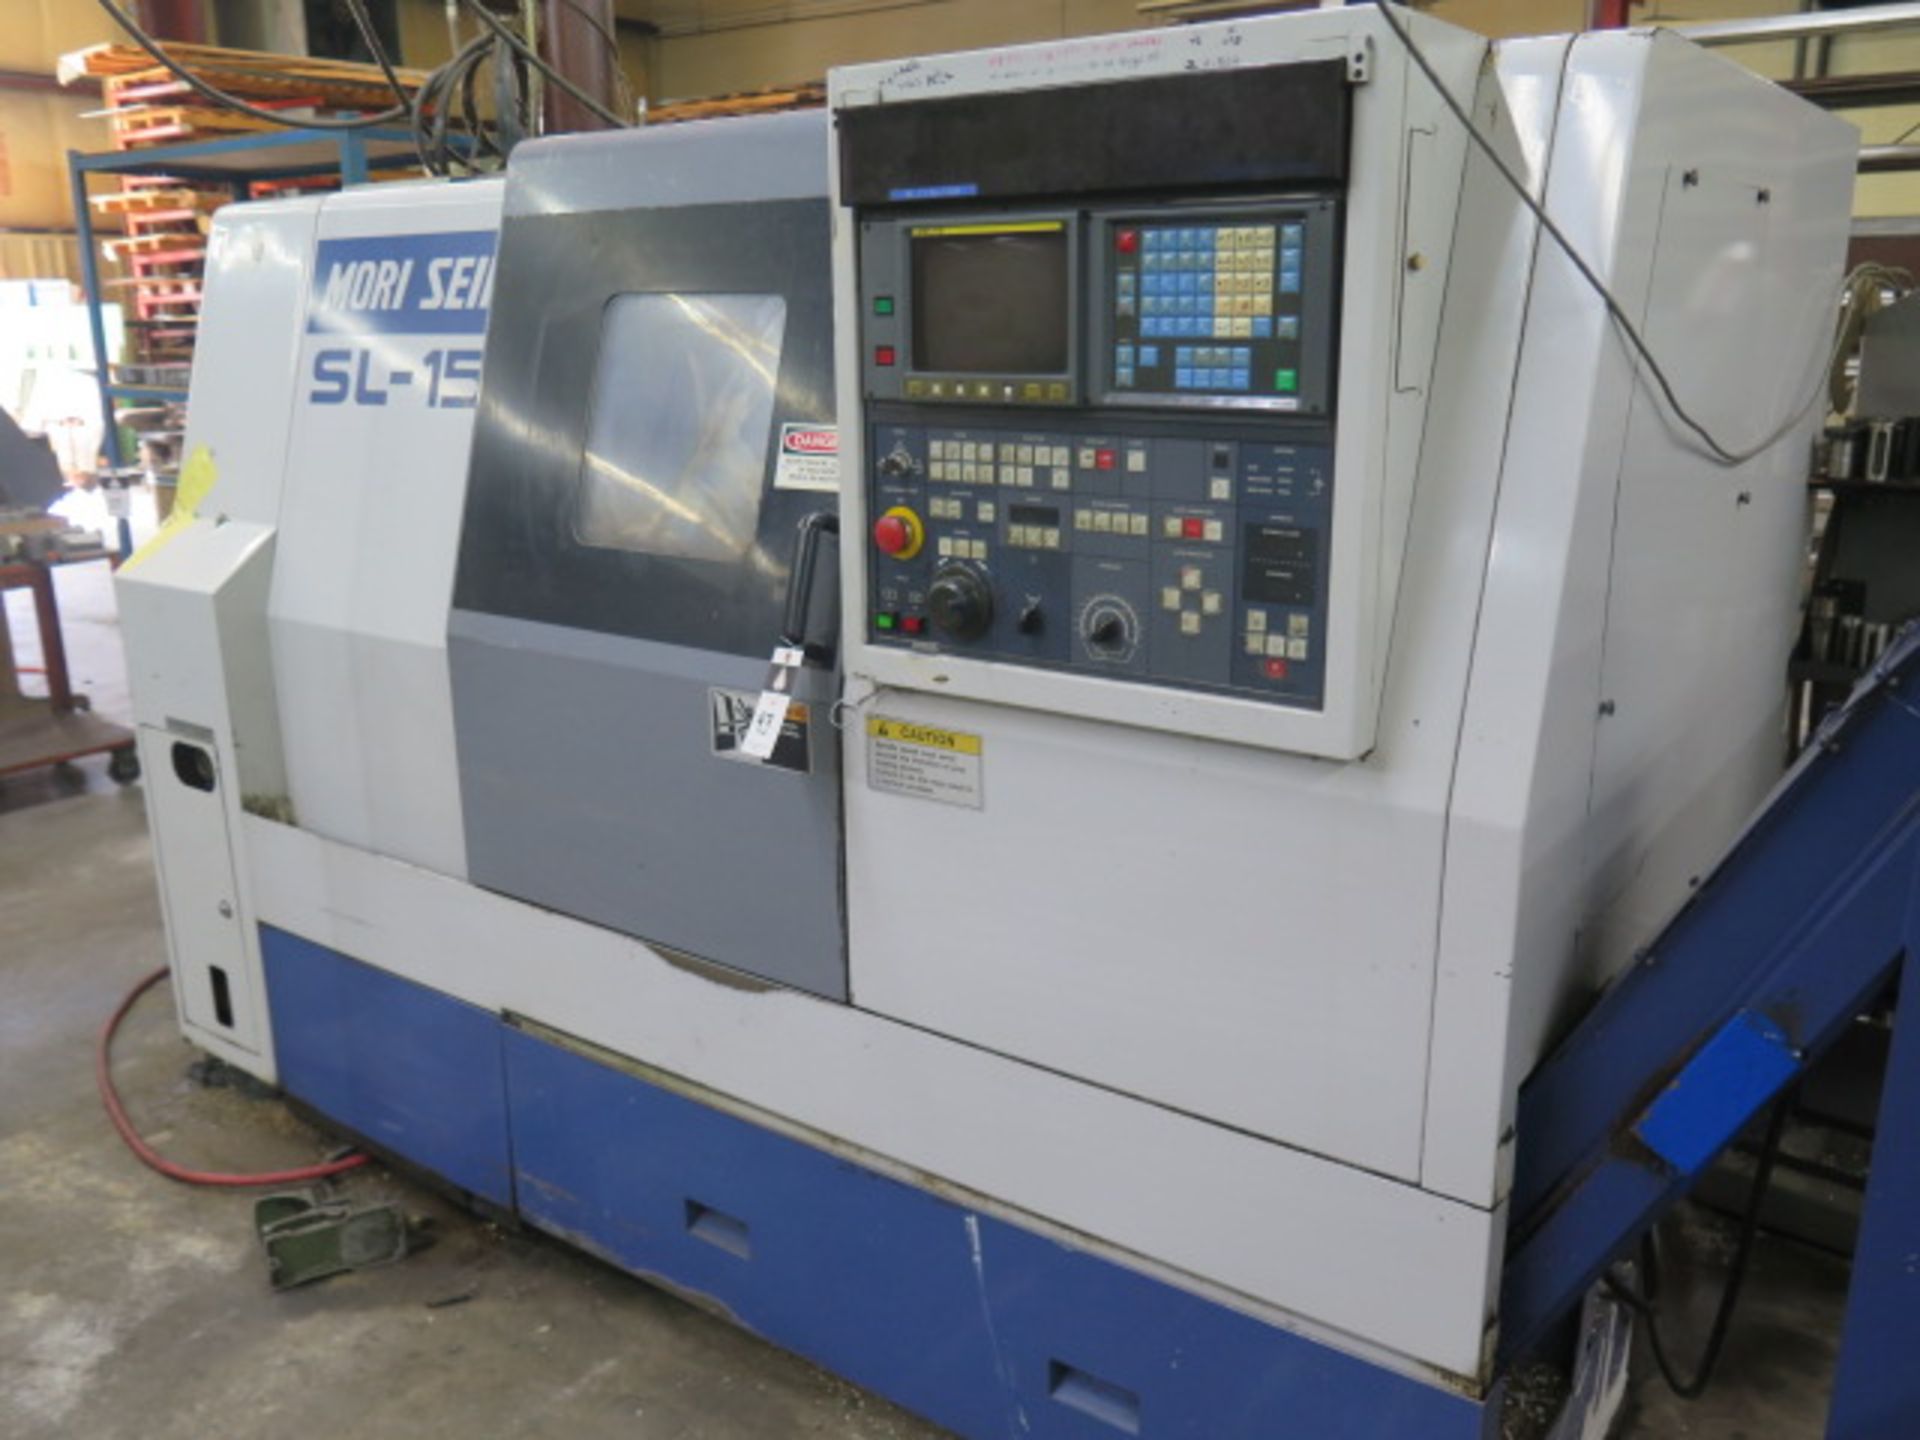 Mori Seiki SL-15 CNC Turning Center s/n 1528 w/ Fanuc MF-T4 Controls, 12-Station Turret, SOLD AS IS - Image 2 of 15